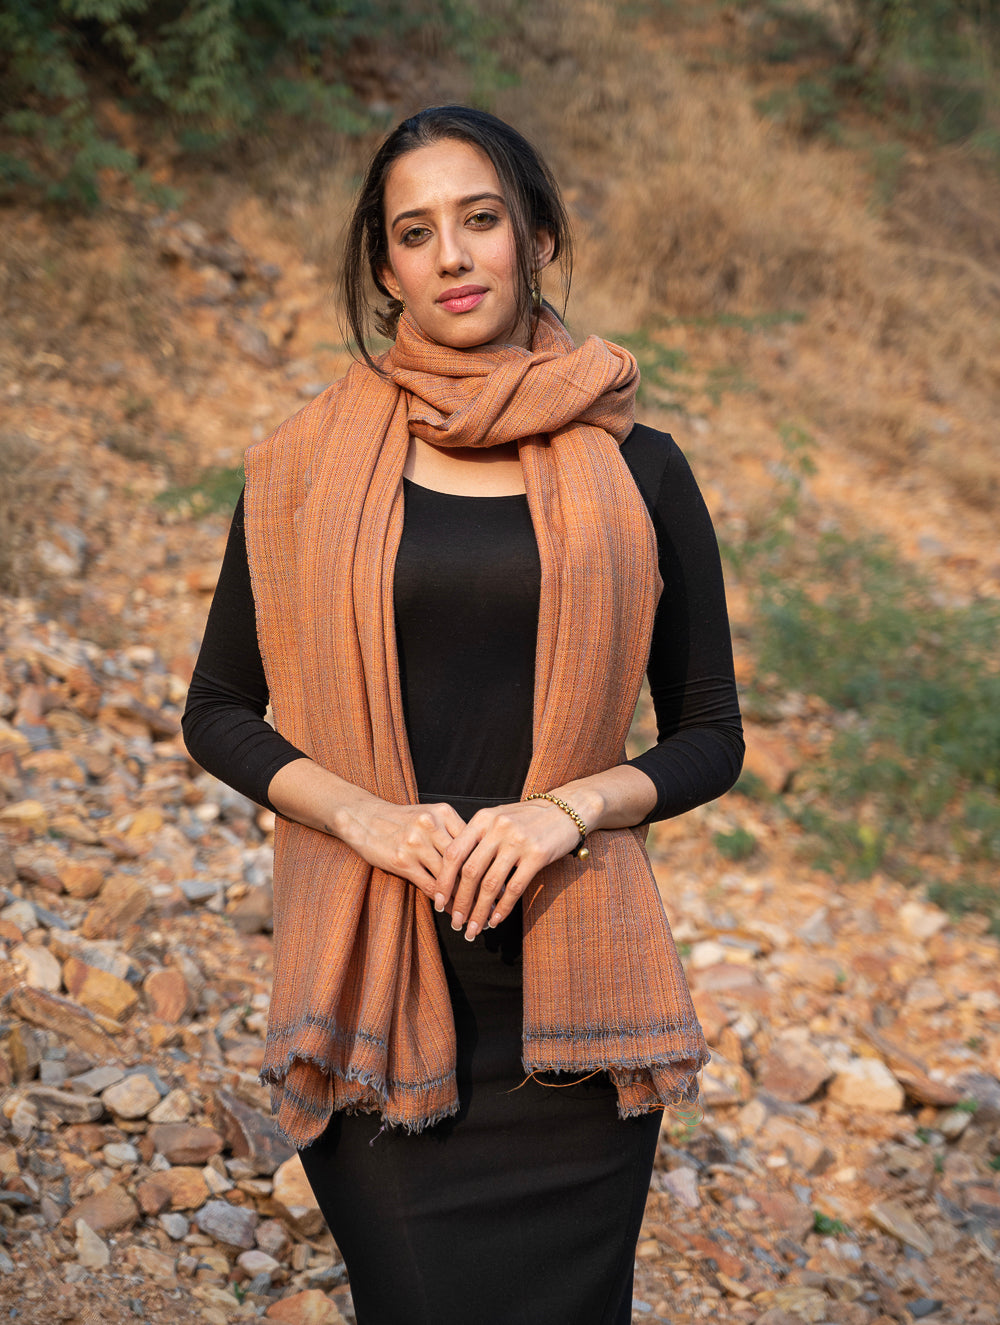 Load image into Gallery viewer, Fine, Soft Himachal Wool Plain Shawl - Pale Orange